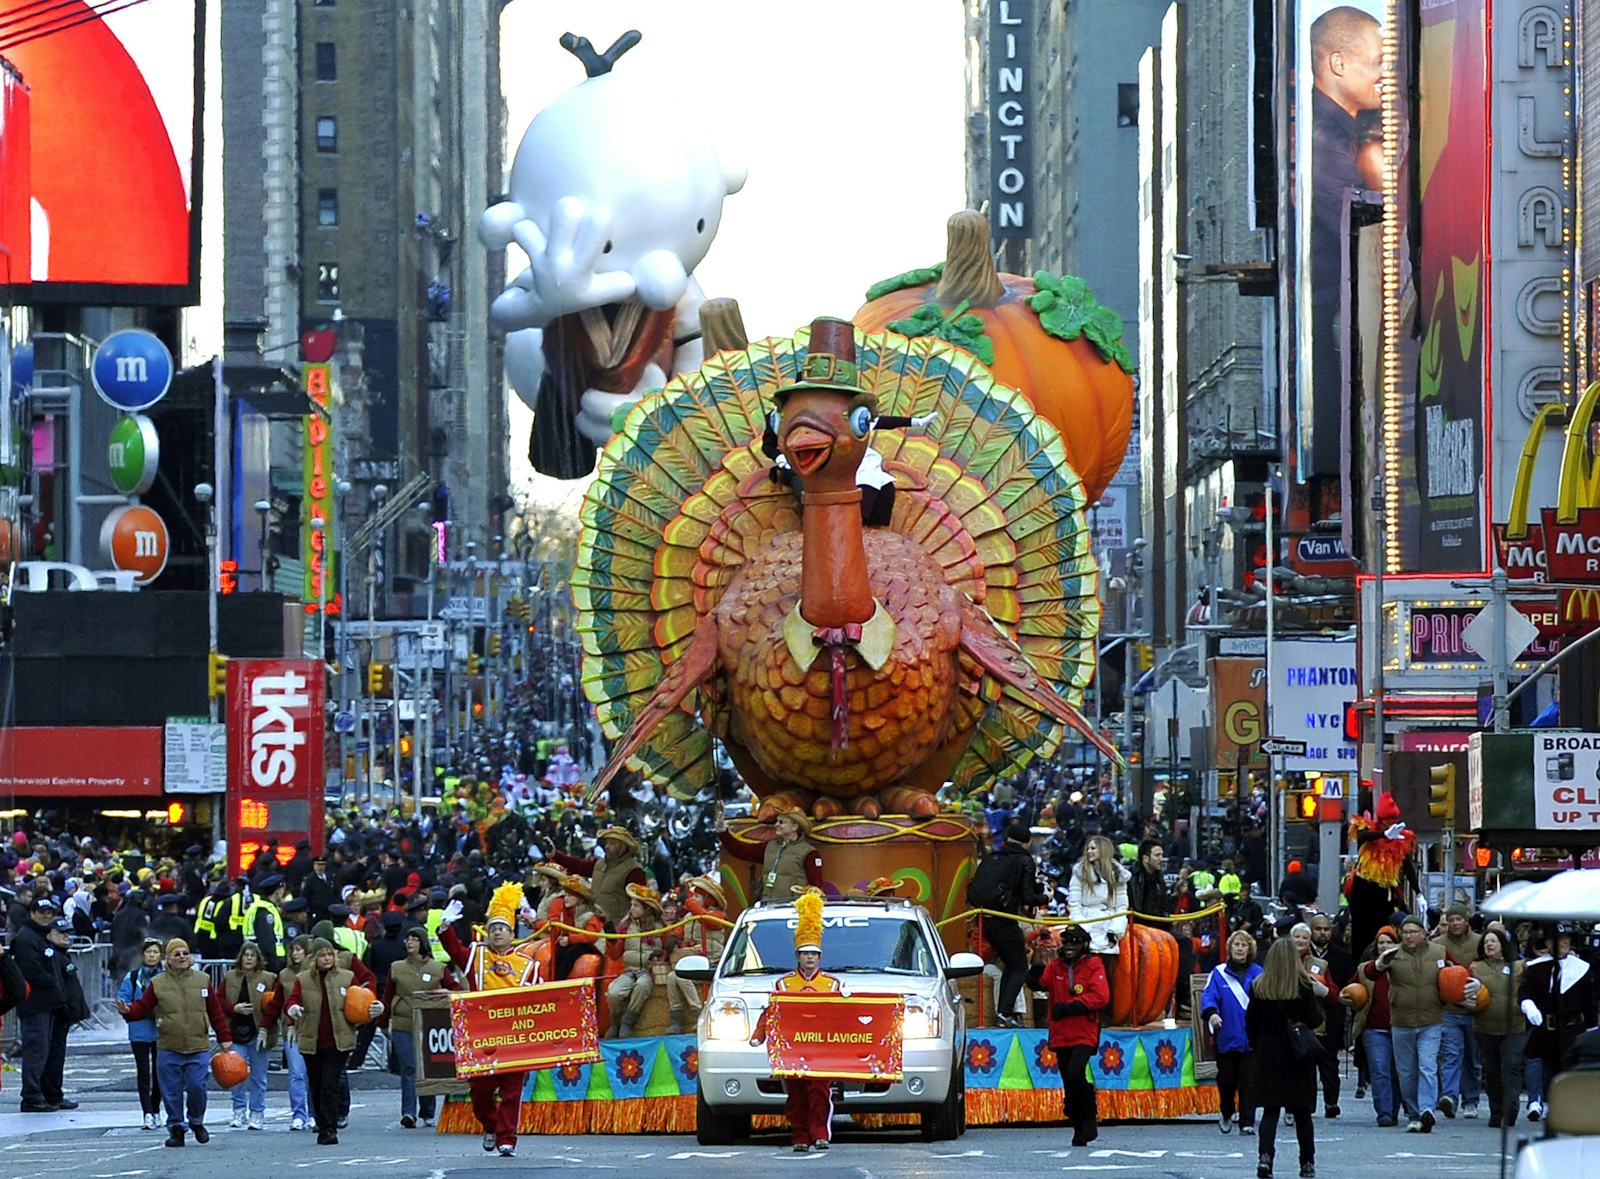 How To Stream The Macy's Thanksgiving Day Parade & Start Your Turkey